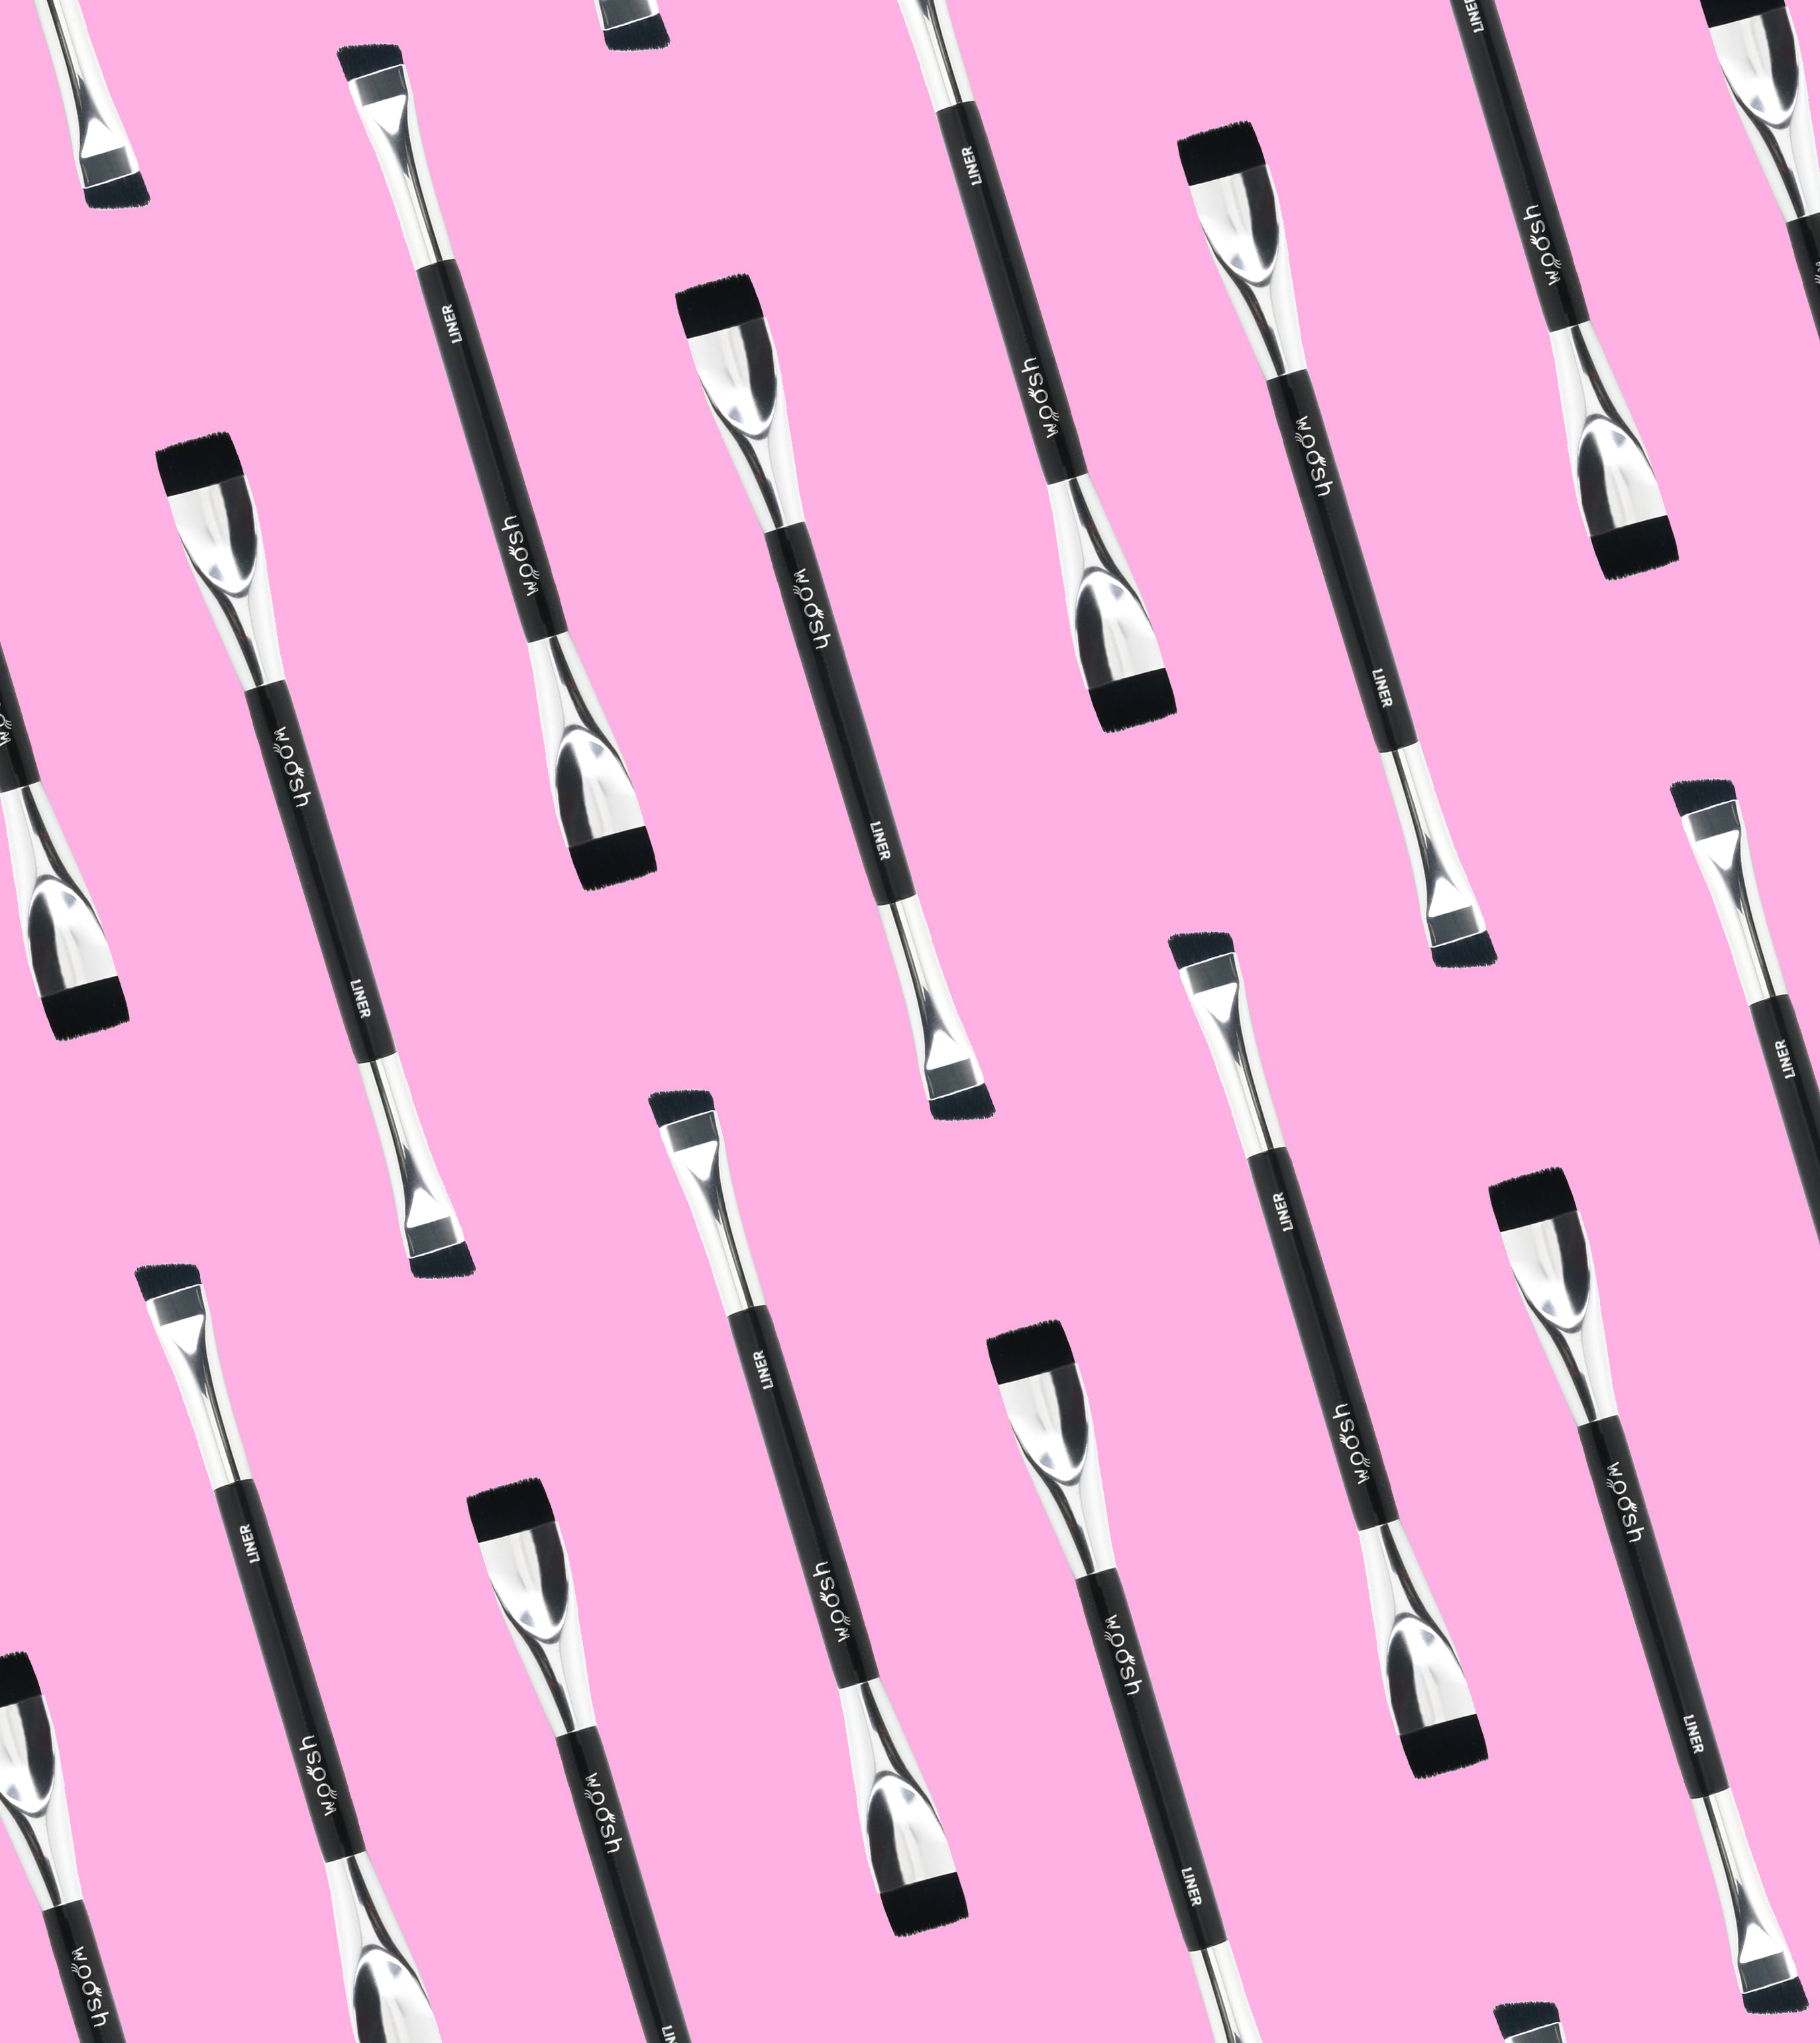 The Arc Brush displayed in an organized pattern in front of a pink background